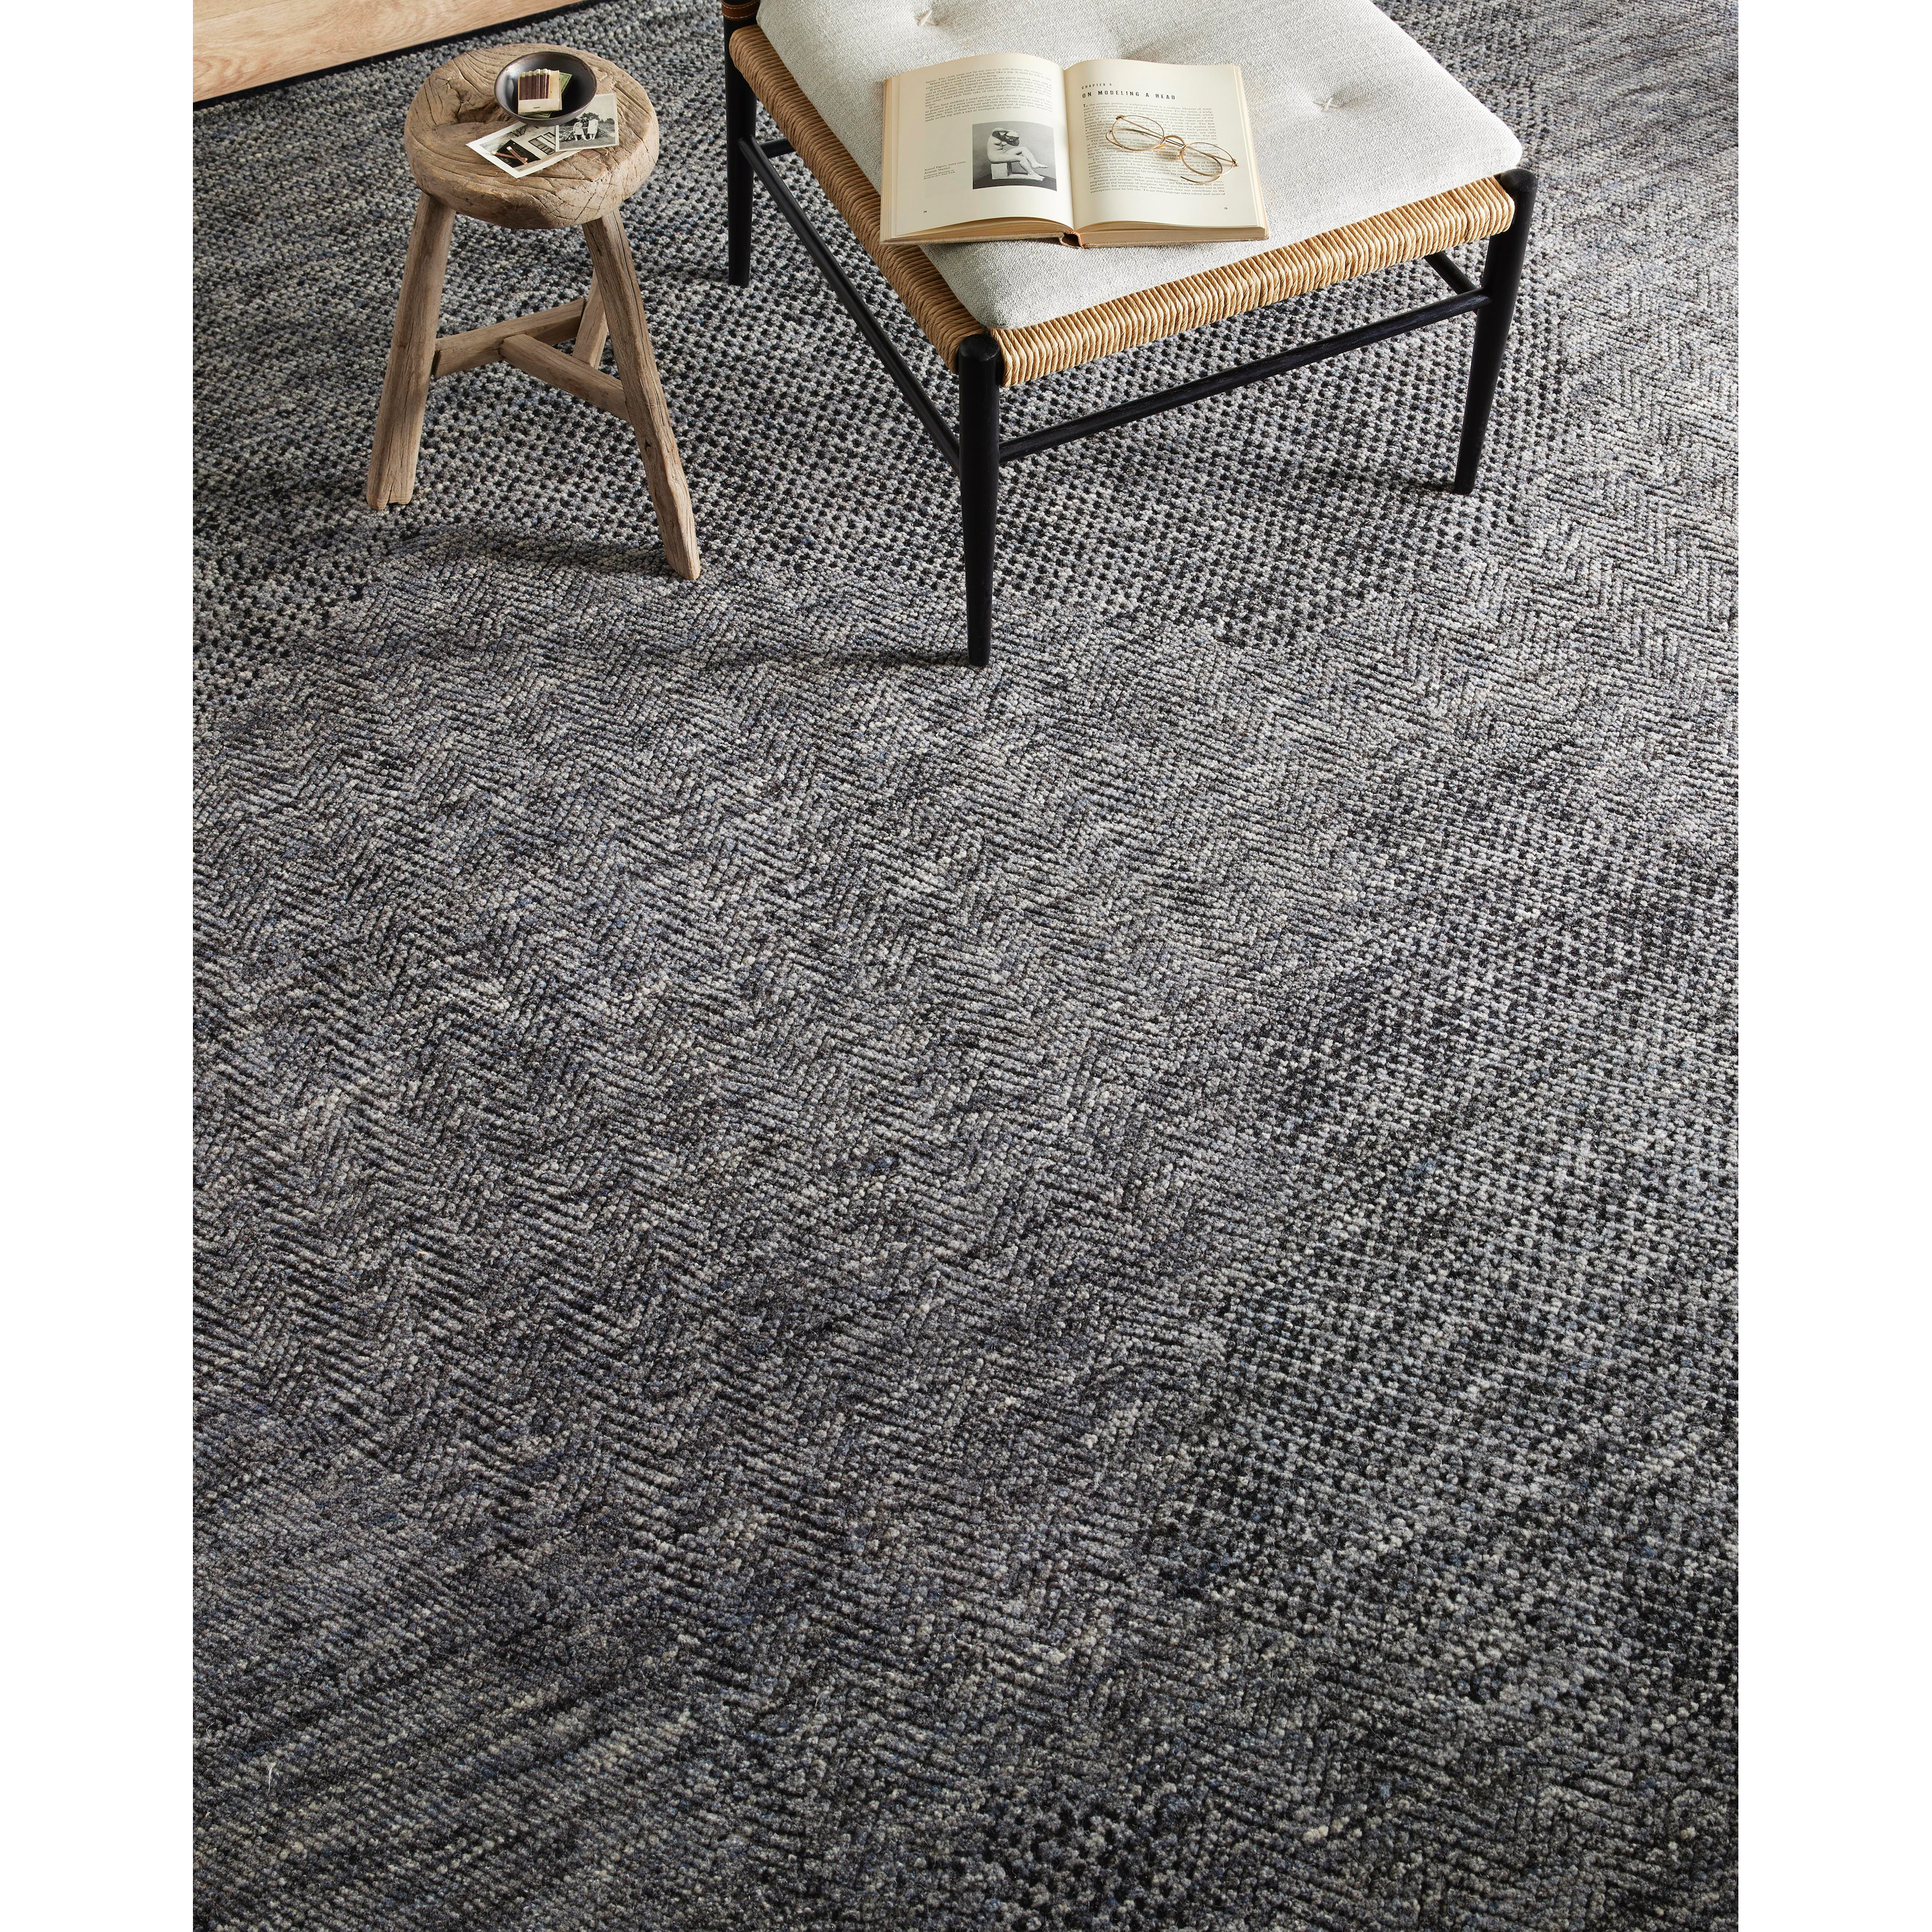 The Collins Amber Lewis x Loloi COI-01 AL Charcoal / Denim rug for Amber Lewis x Loloi is hand-knotted of wool and cotton by skilled artisans in India and GoodWeave-Certified. Collins features varying knotting techniques interwoven to create a uniquely texture pattern. Amethyst Home provides interior design, new construction, custom furniture, and rugs for the Monterey metro area.